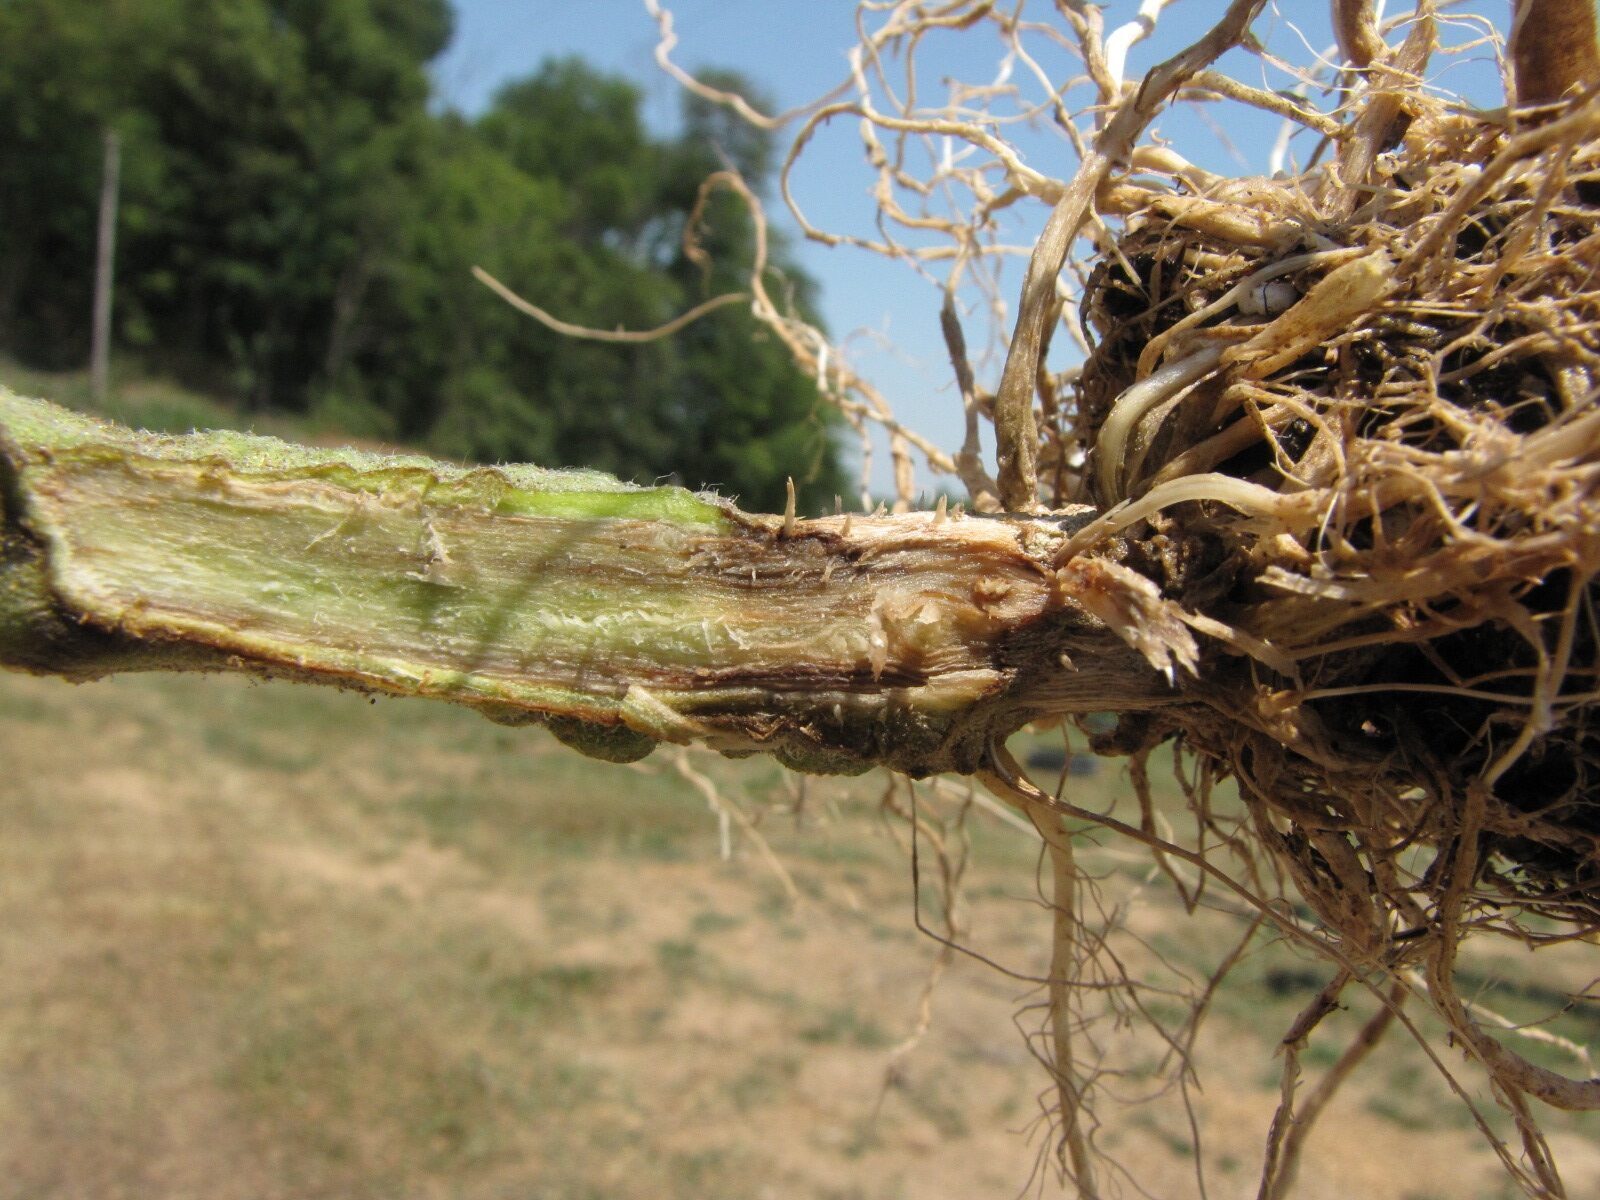 Dark vascular discoloration is typical of crown rot of tomato